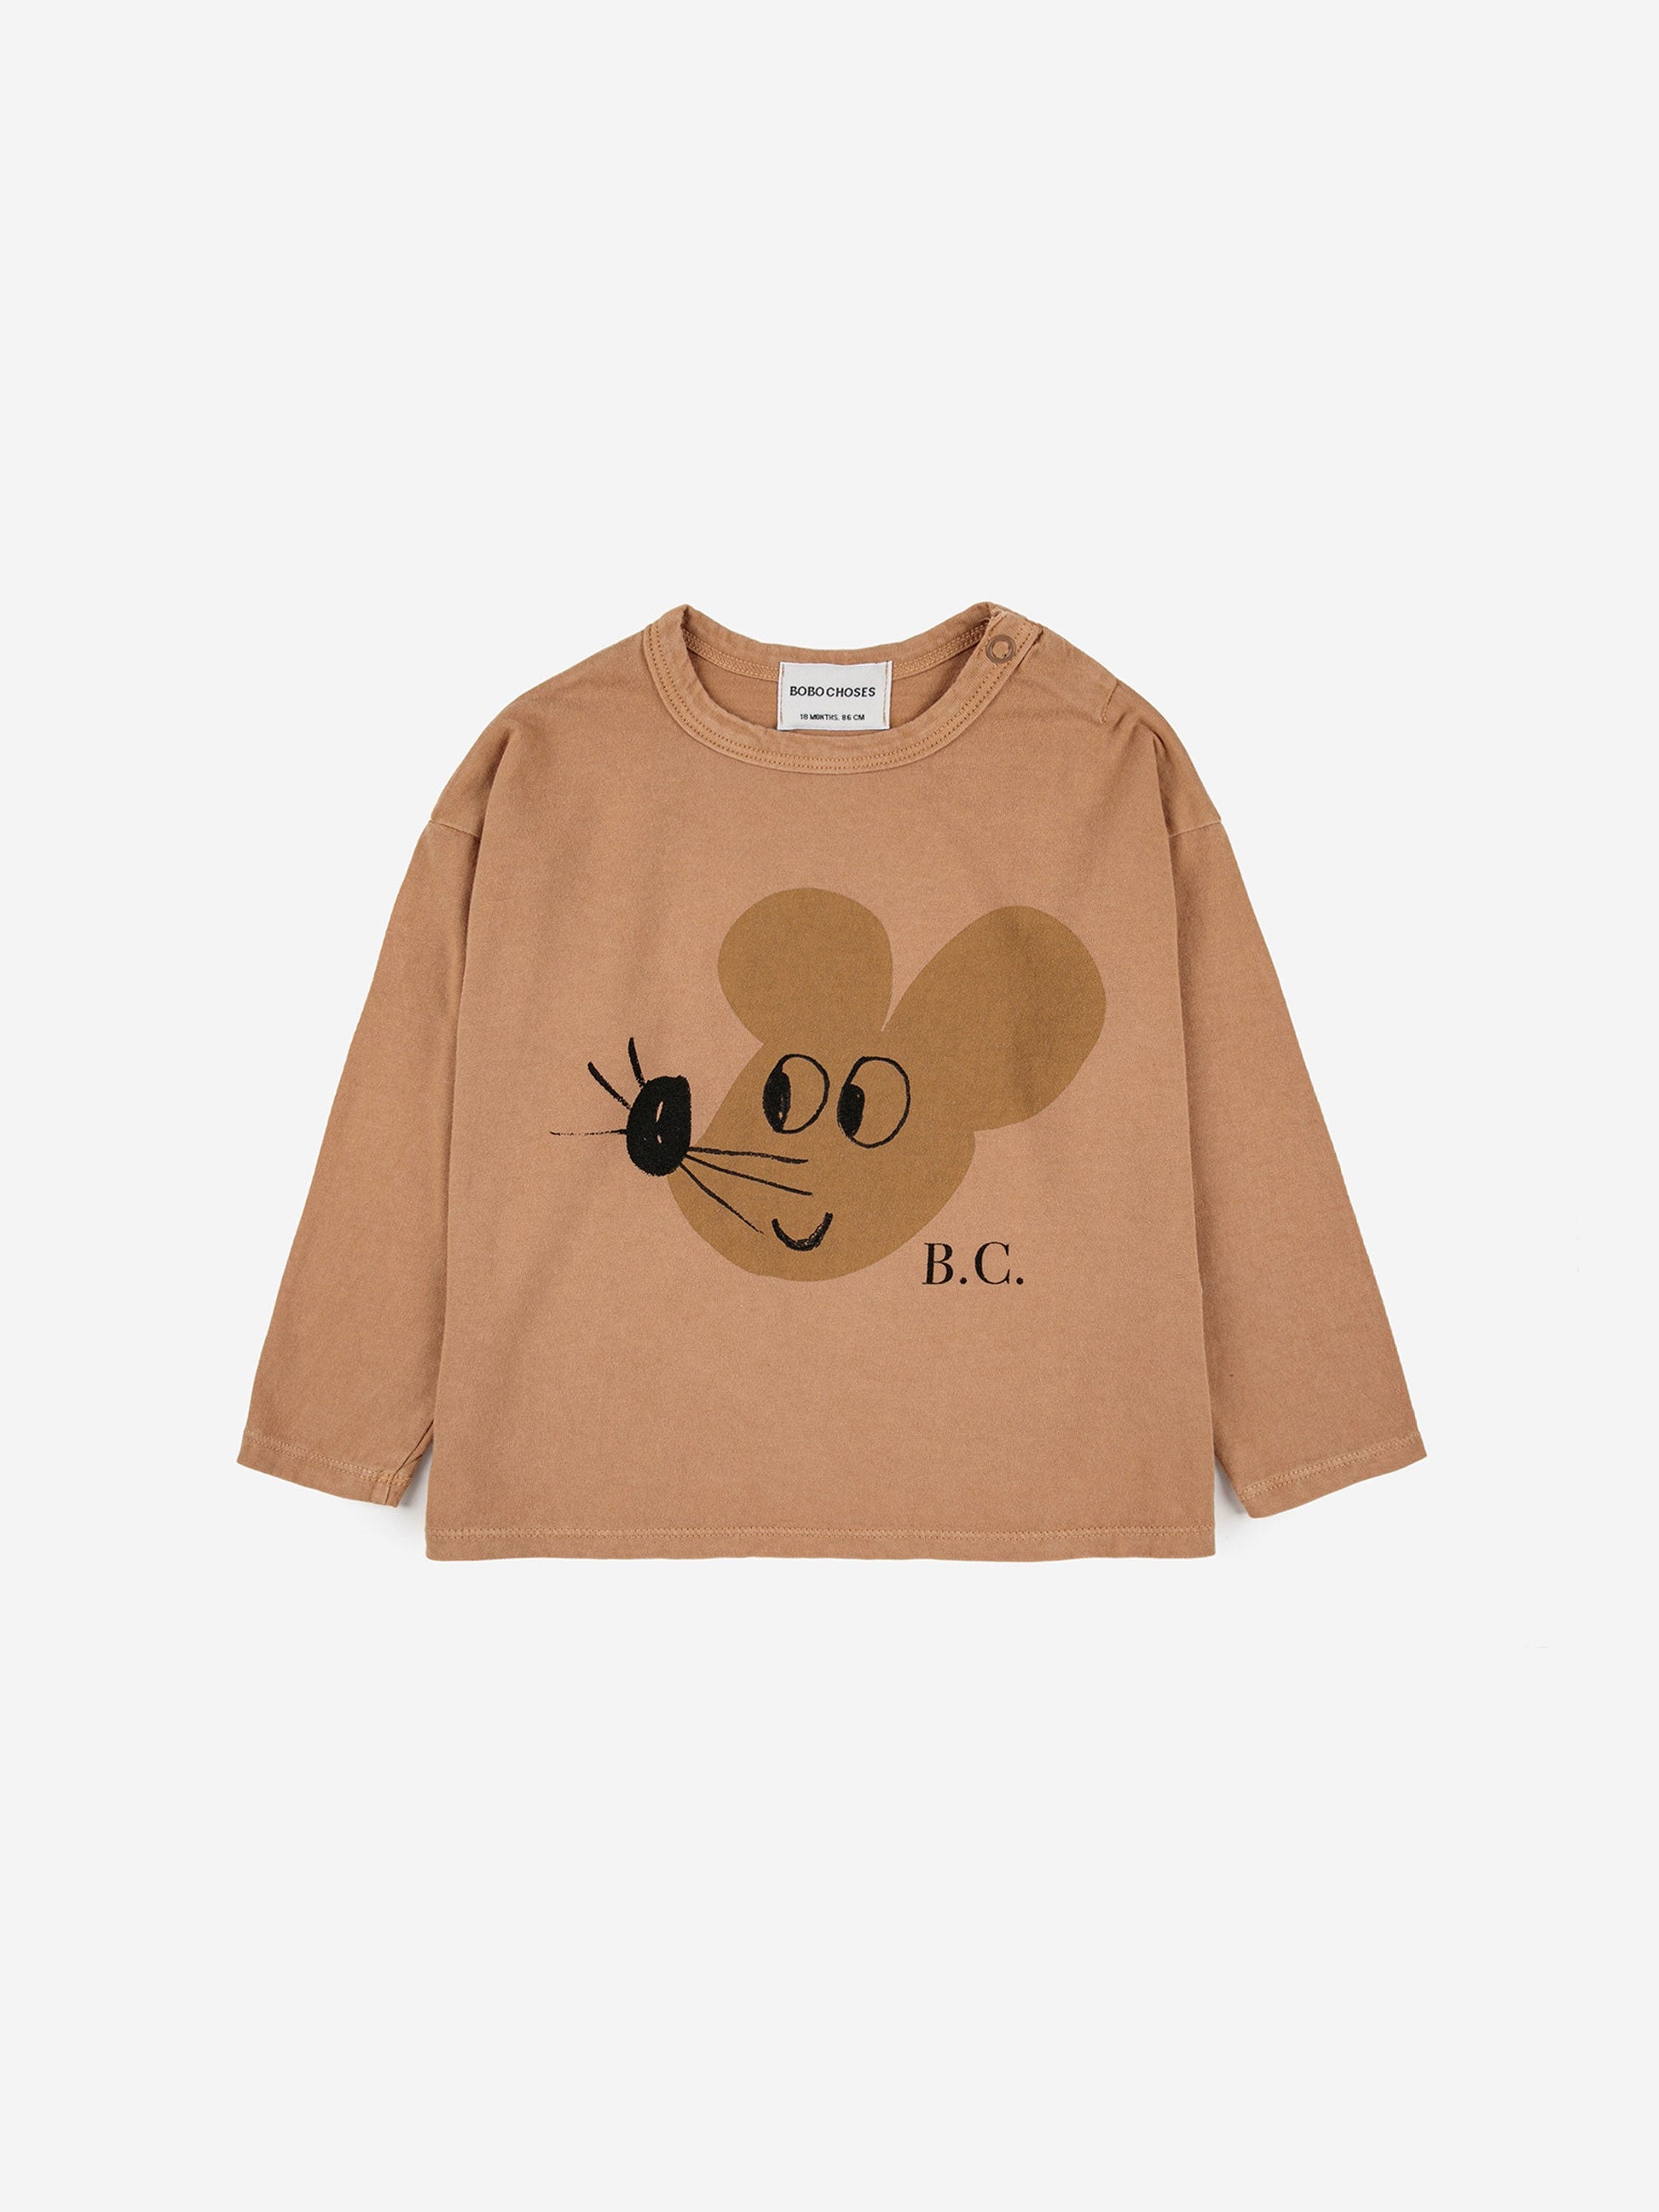 Bobo Choses Baby Mouse T-Shirt - 100% organic cotton light brown long sleeve t-shirt. Designed with long sleeves, dropped shoulder and shoulder snap fastening. It has a loose fit. Made in Spain.